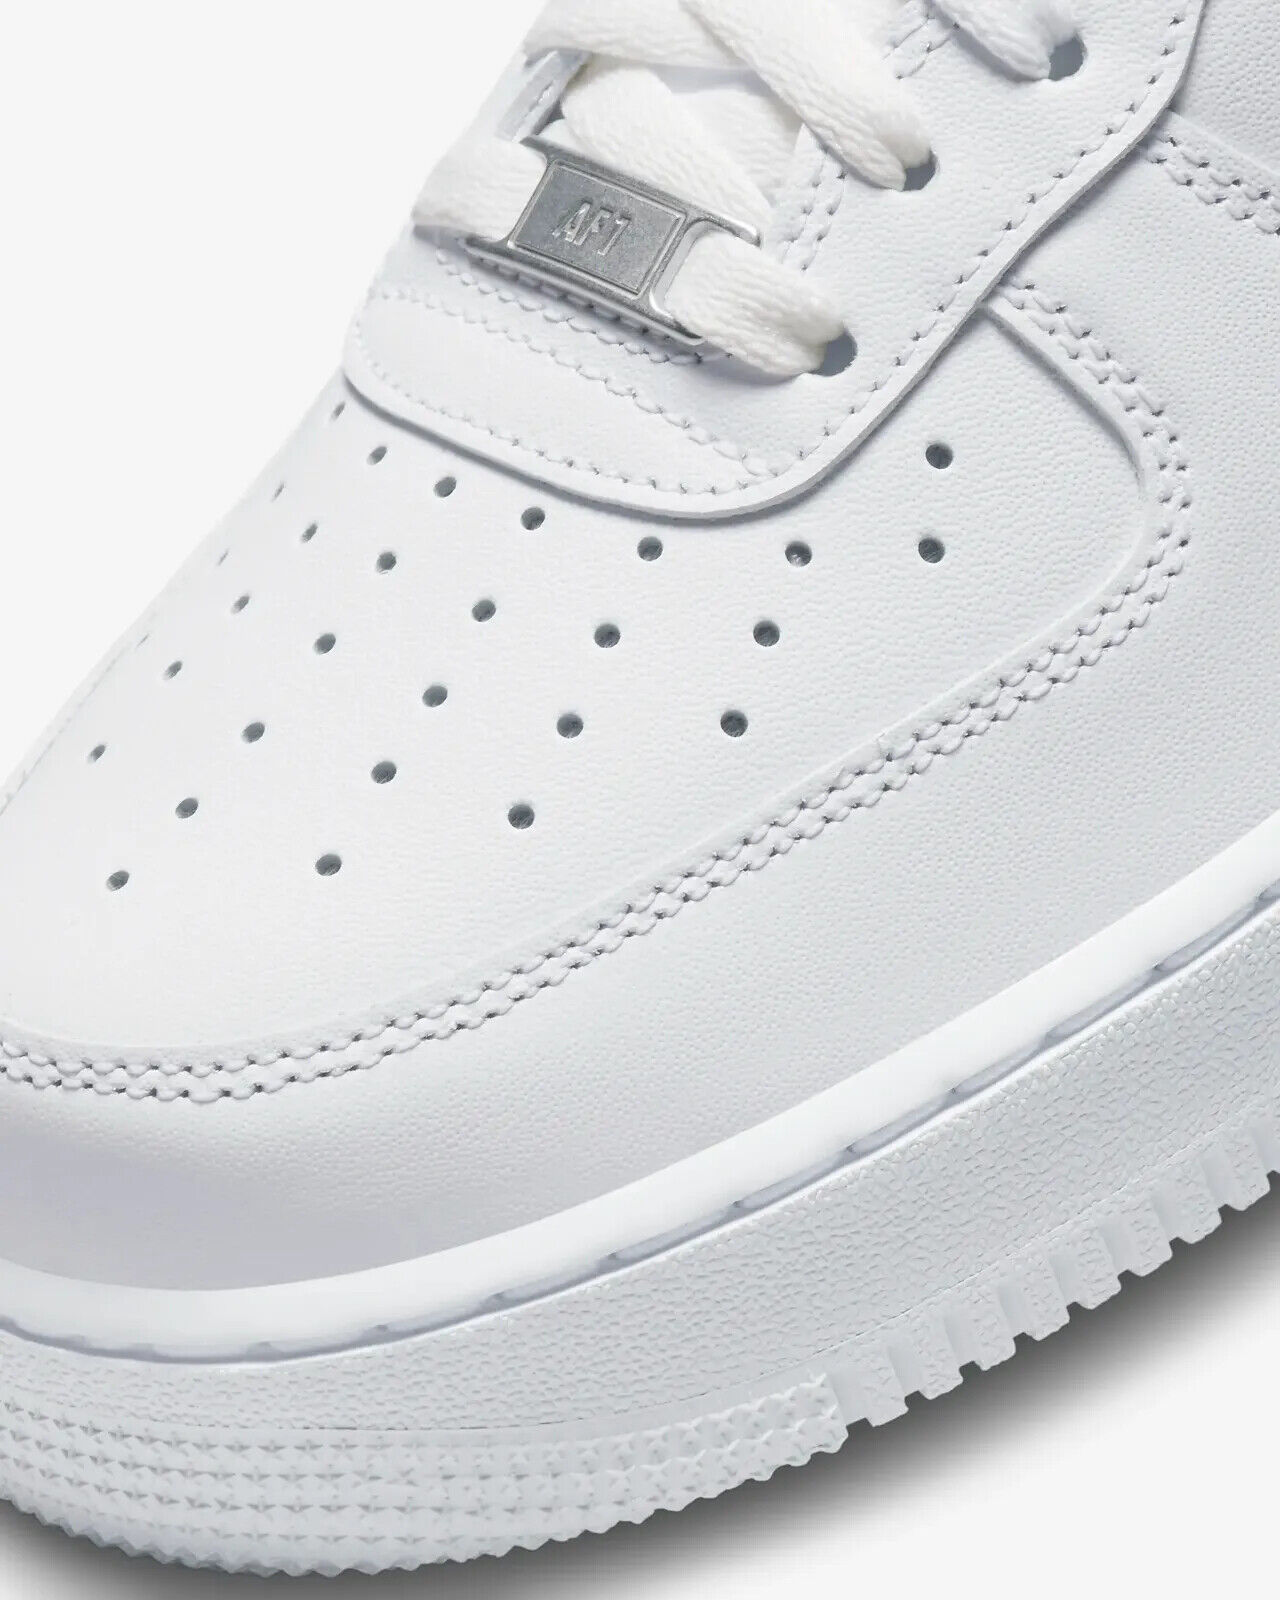 Nike Air Force 1 Low '07 White on White Men's Sneakers | eBay